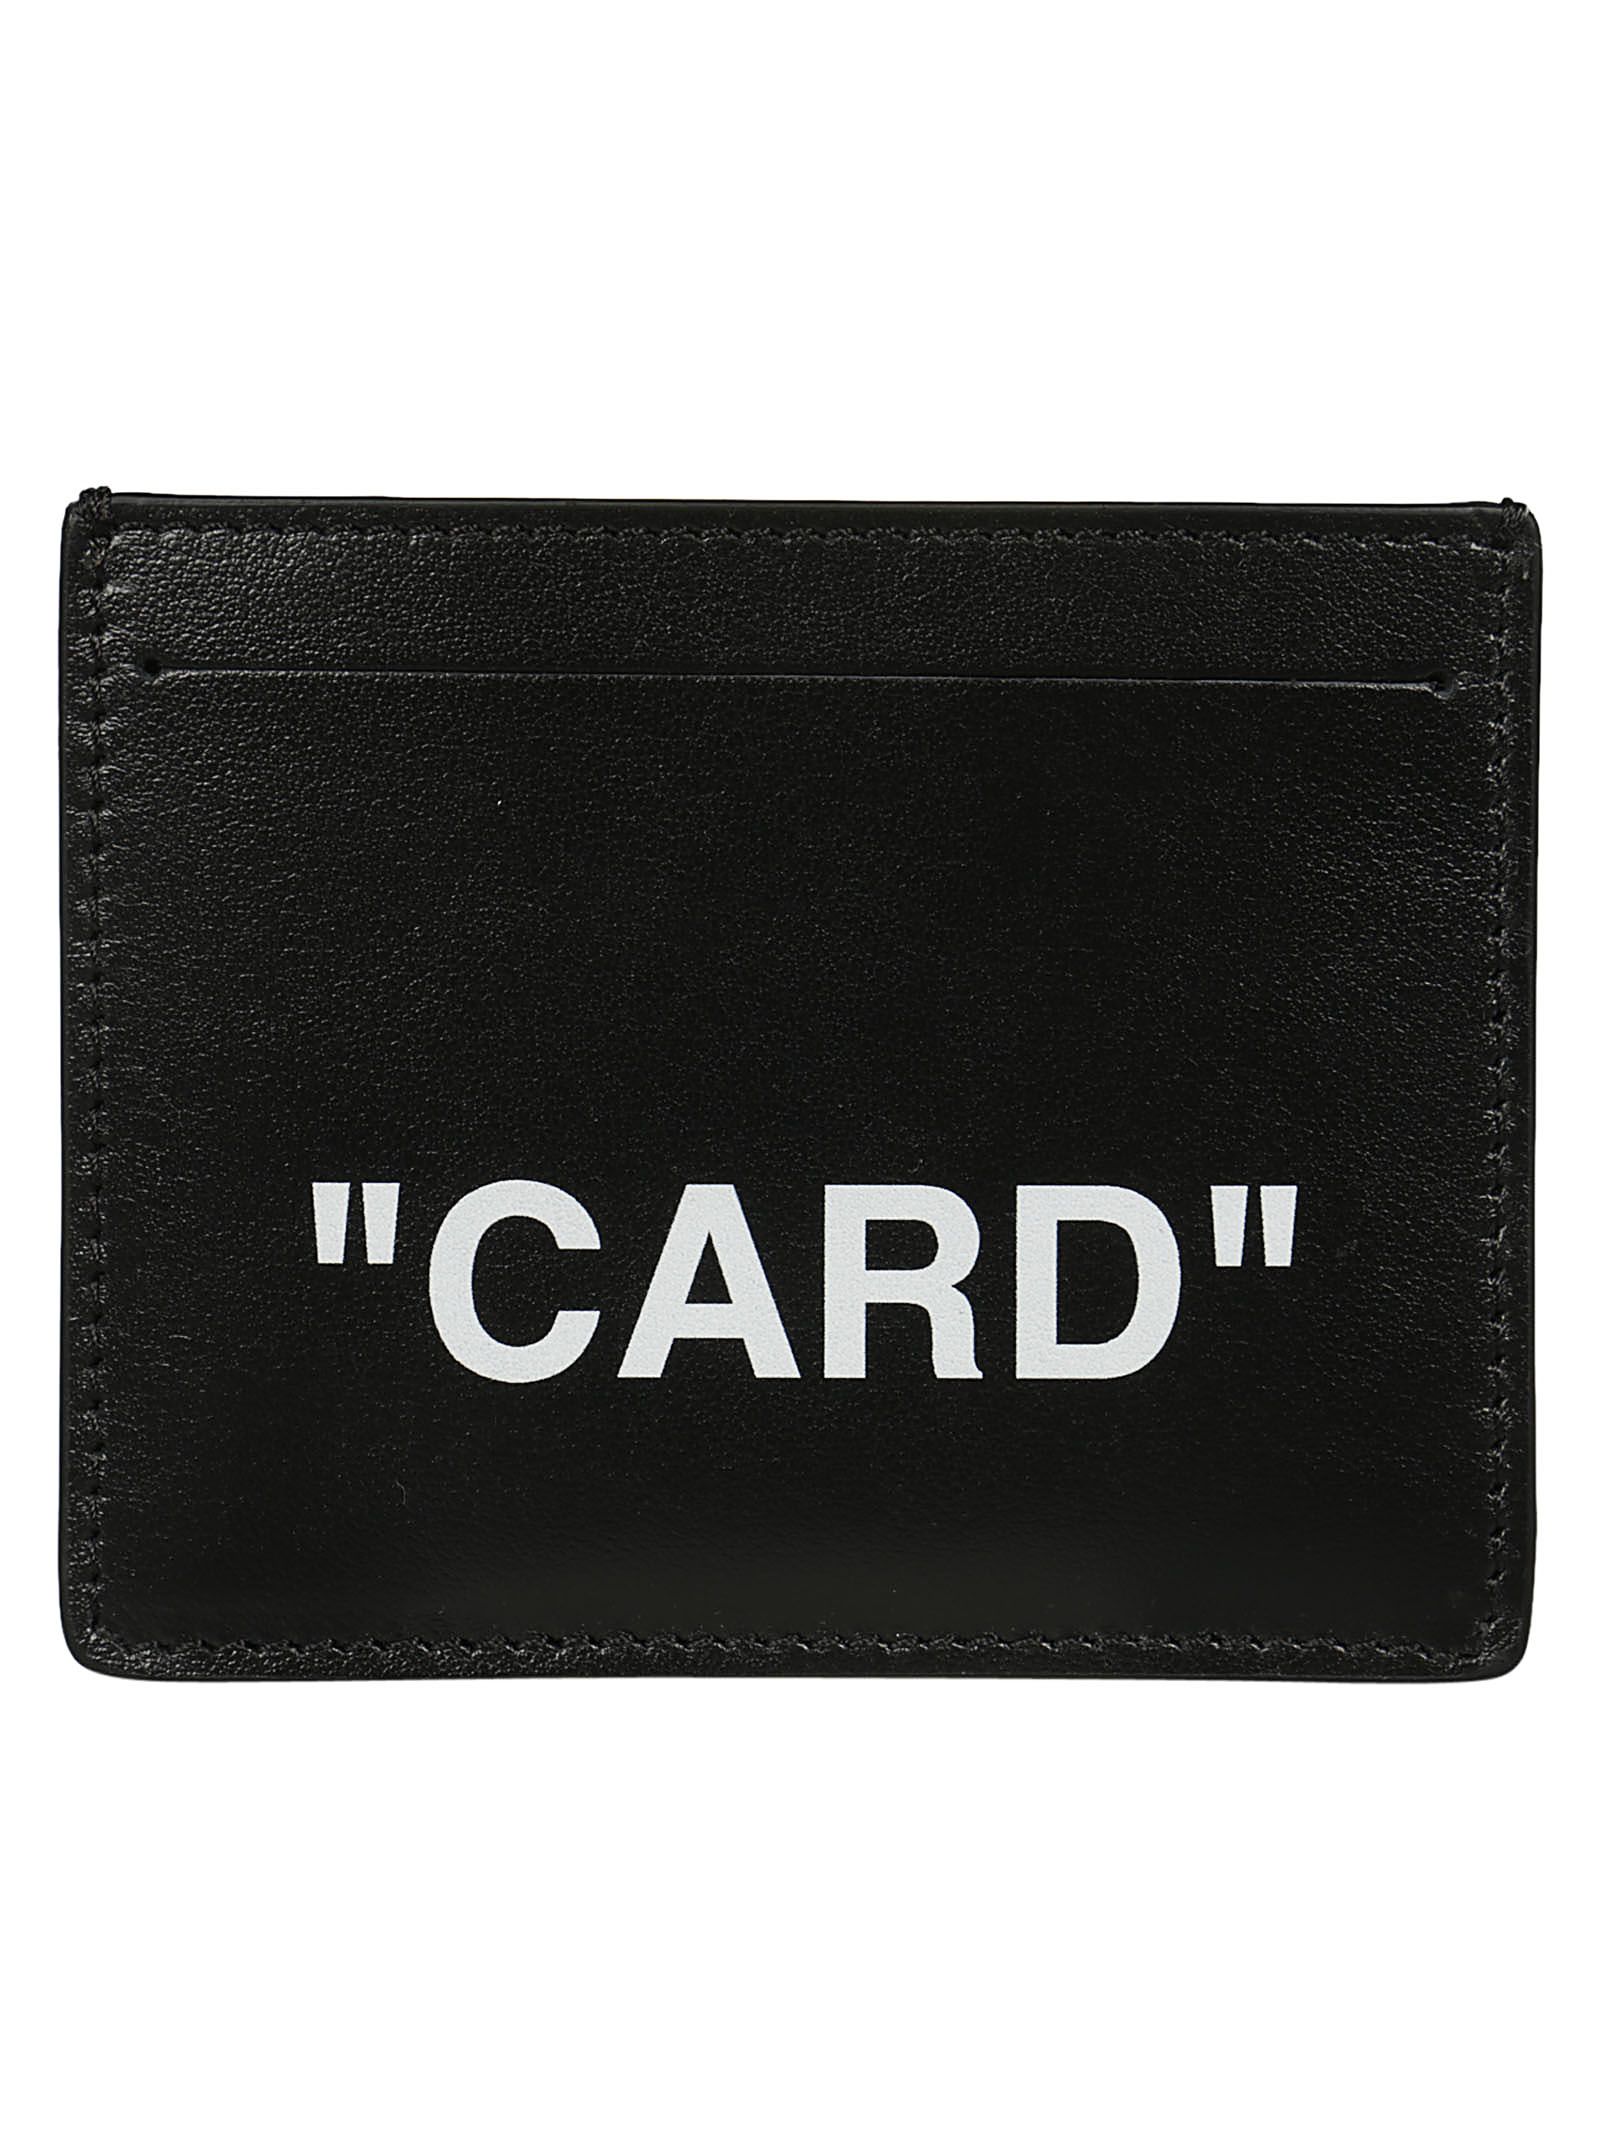 italist | Best price in the market for Off-White Off-white Printed Card ...